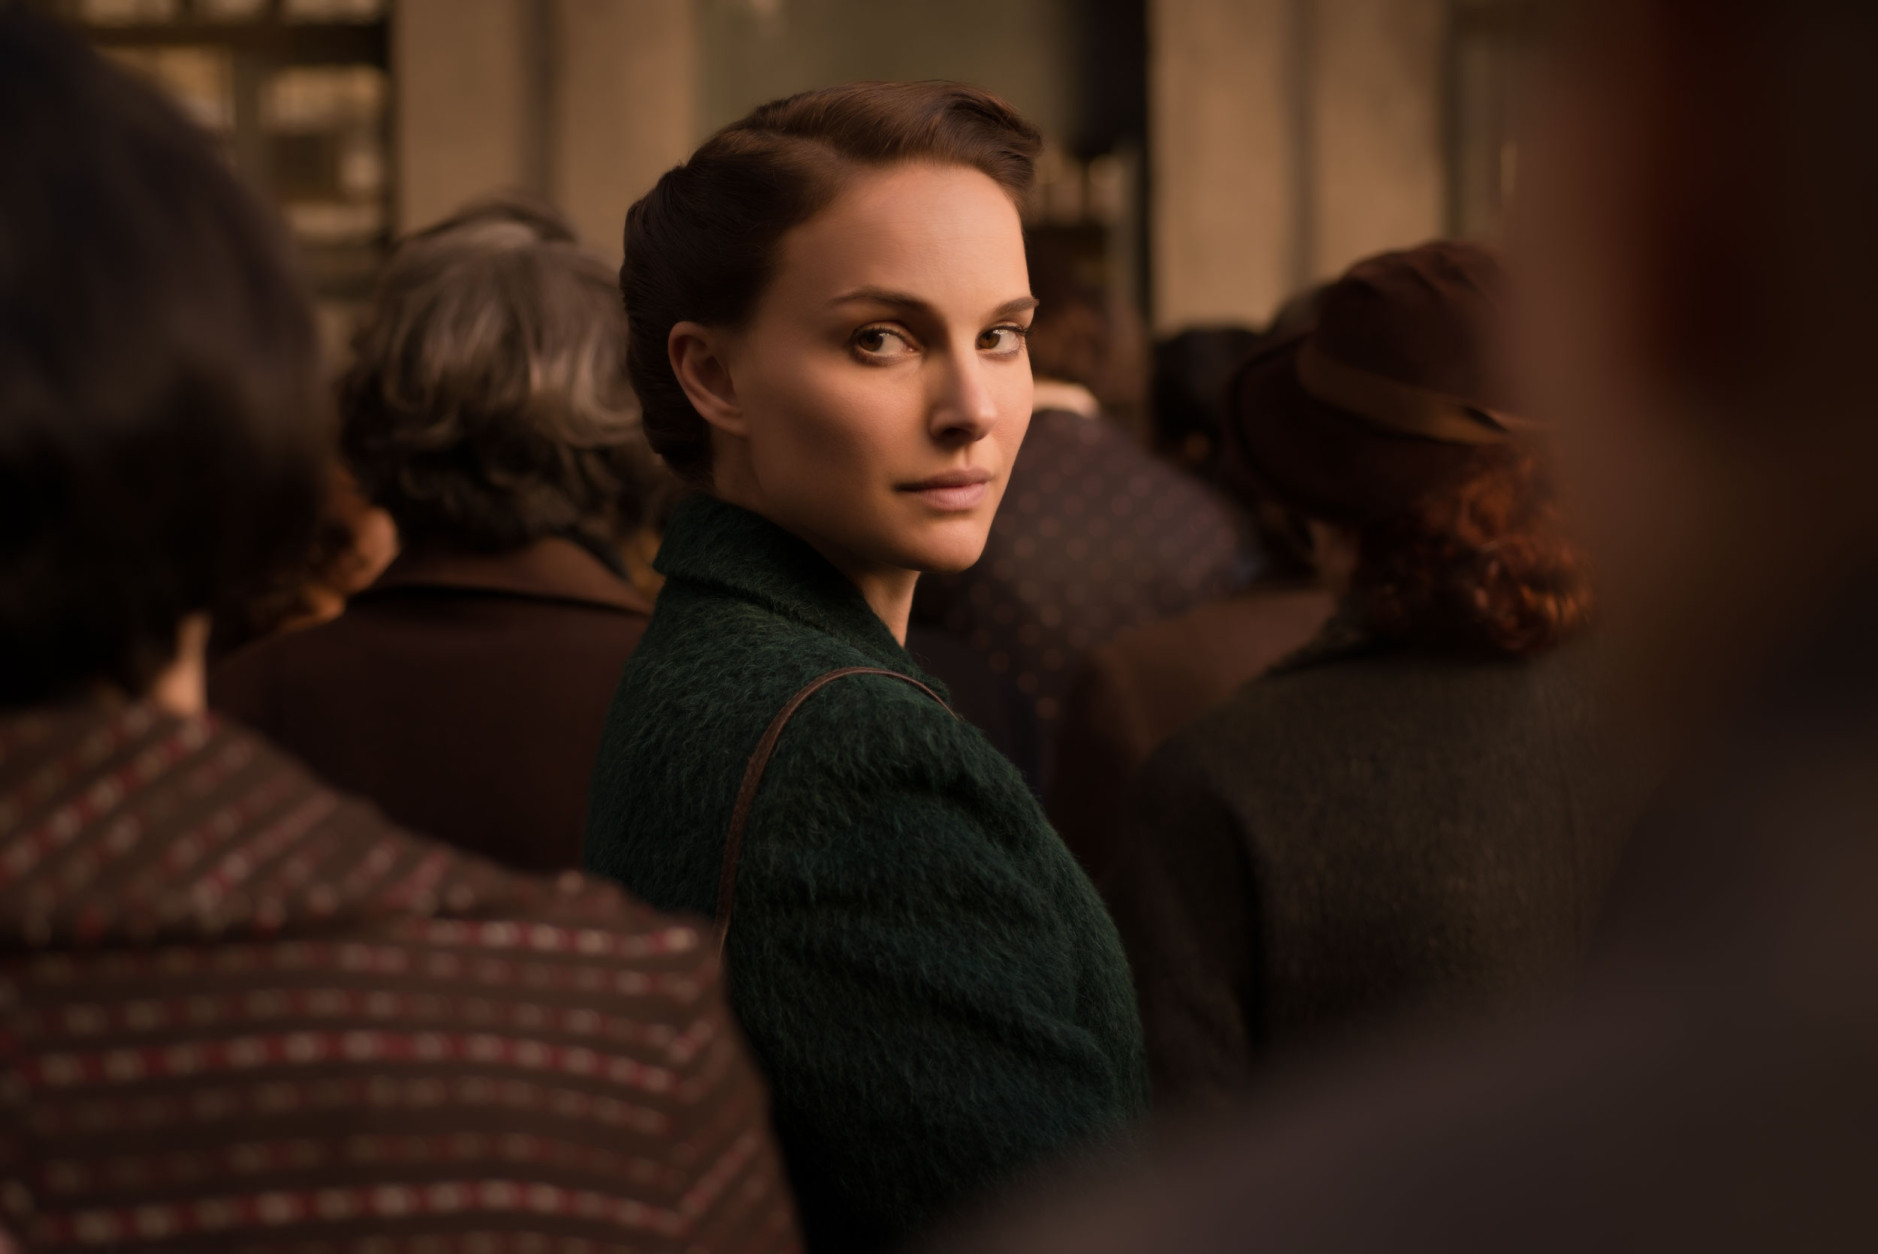 Natalie Portman directs and stars in "A Tale of Love and Darkness." (Voltage Pictures/Ran Mendelson)